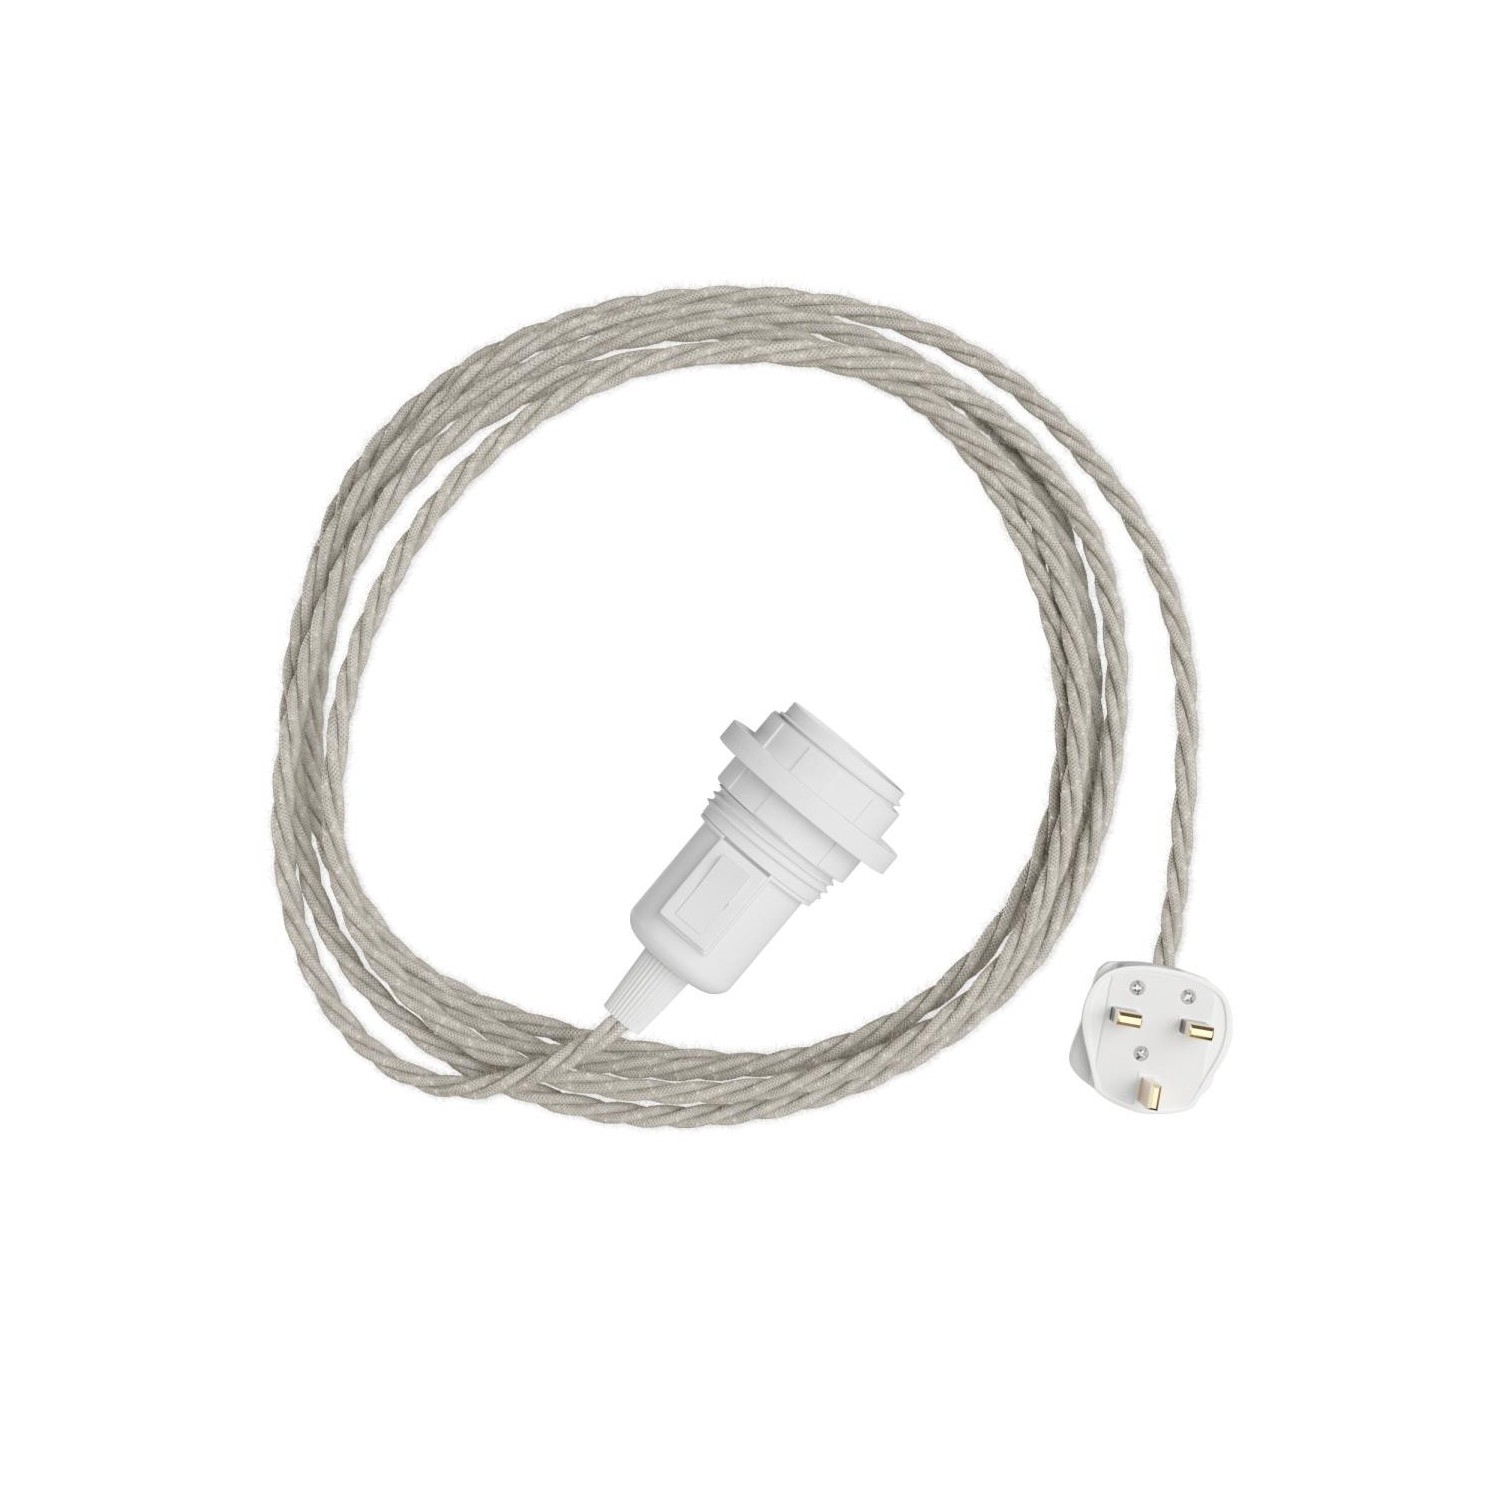 Snake Twisted for lampshade - Plug-in lamp with twisted textile cable